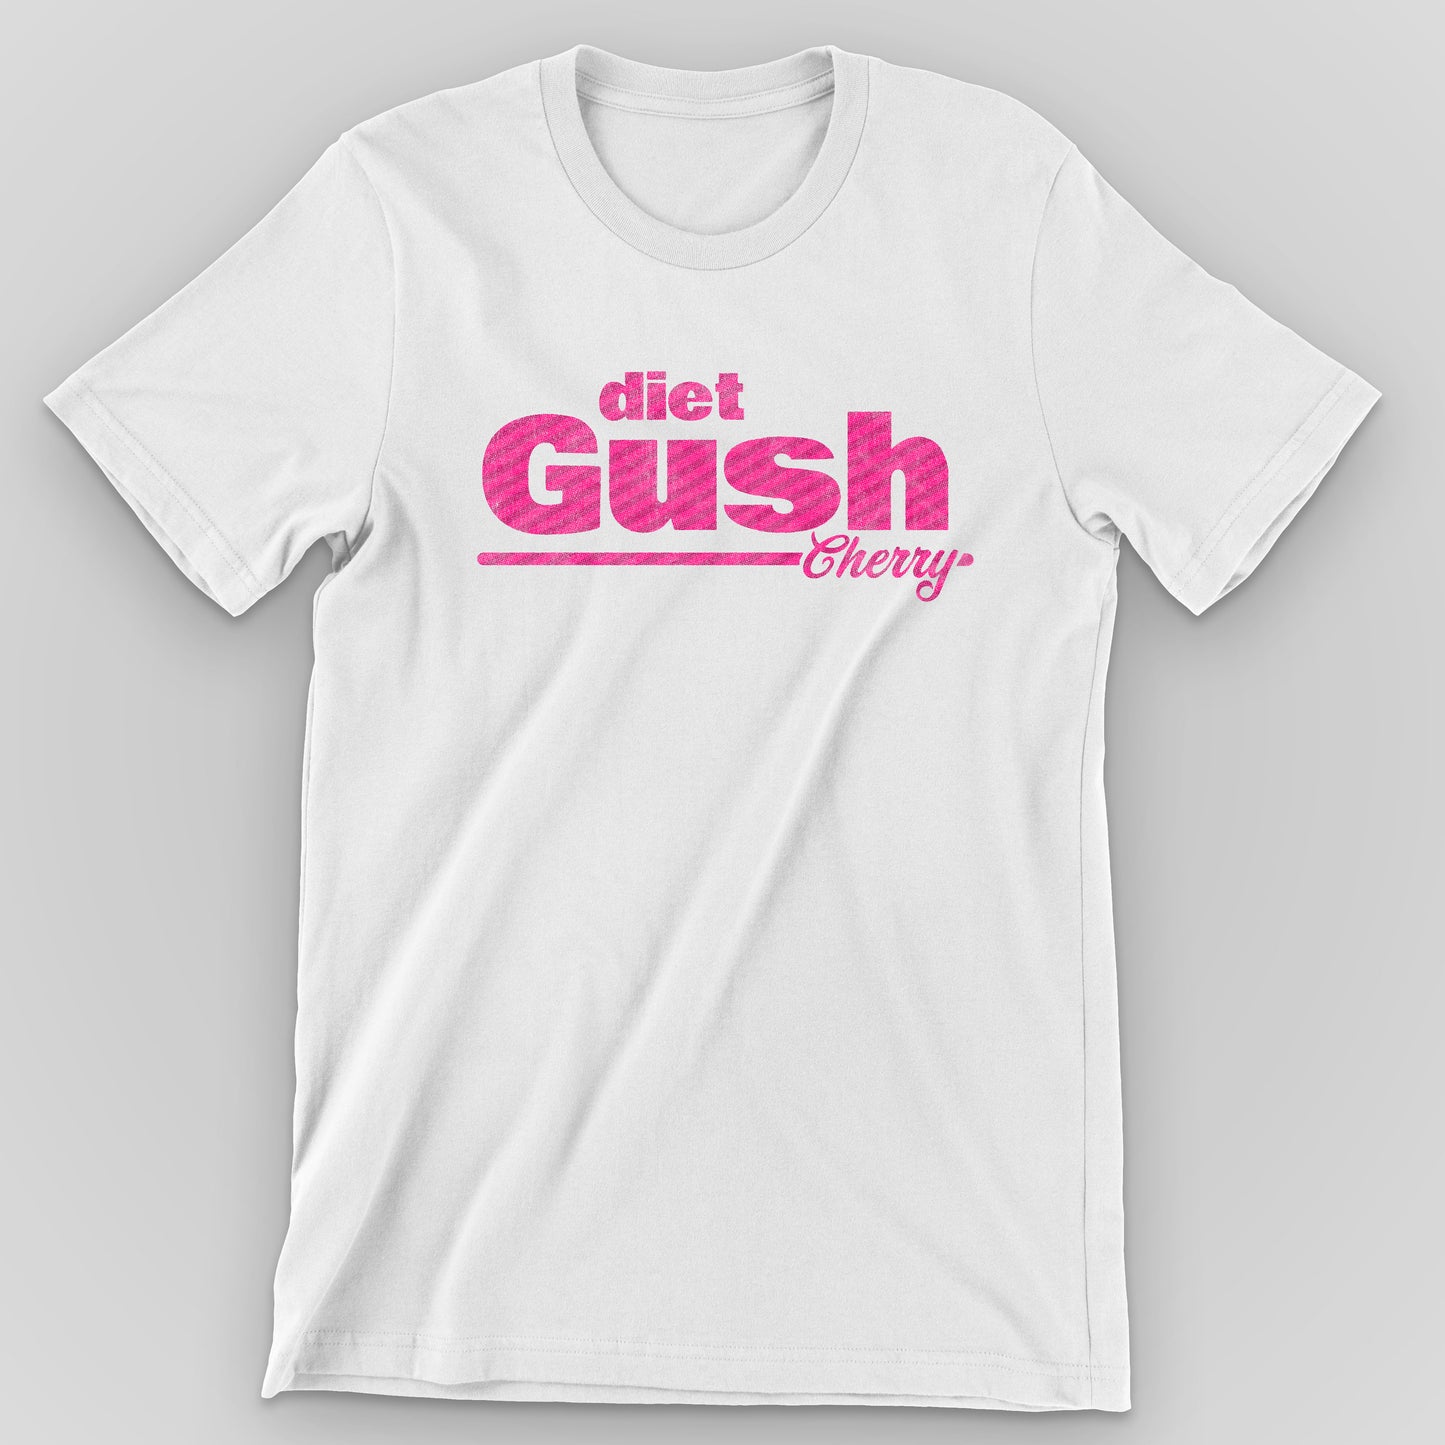 White Diet Gush Cherry Soda Graphic T-Shirt by Snaxtime